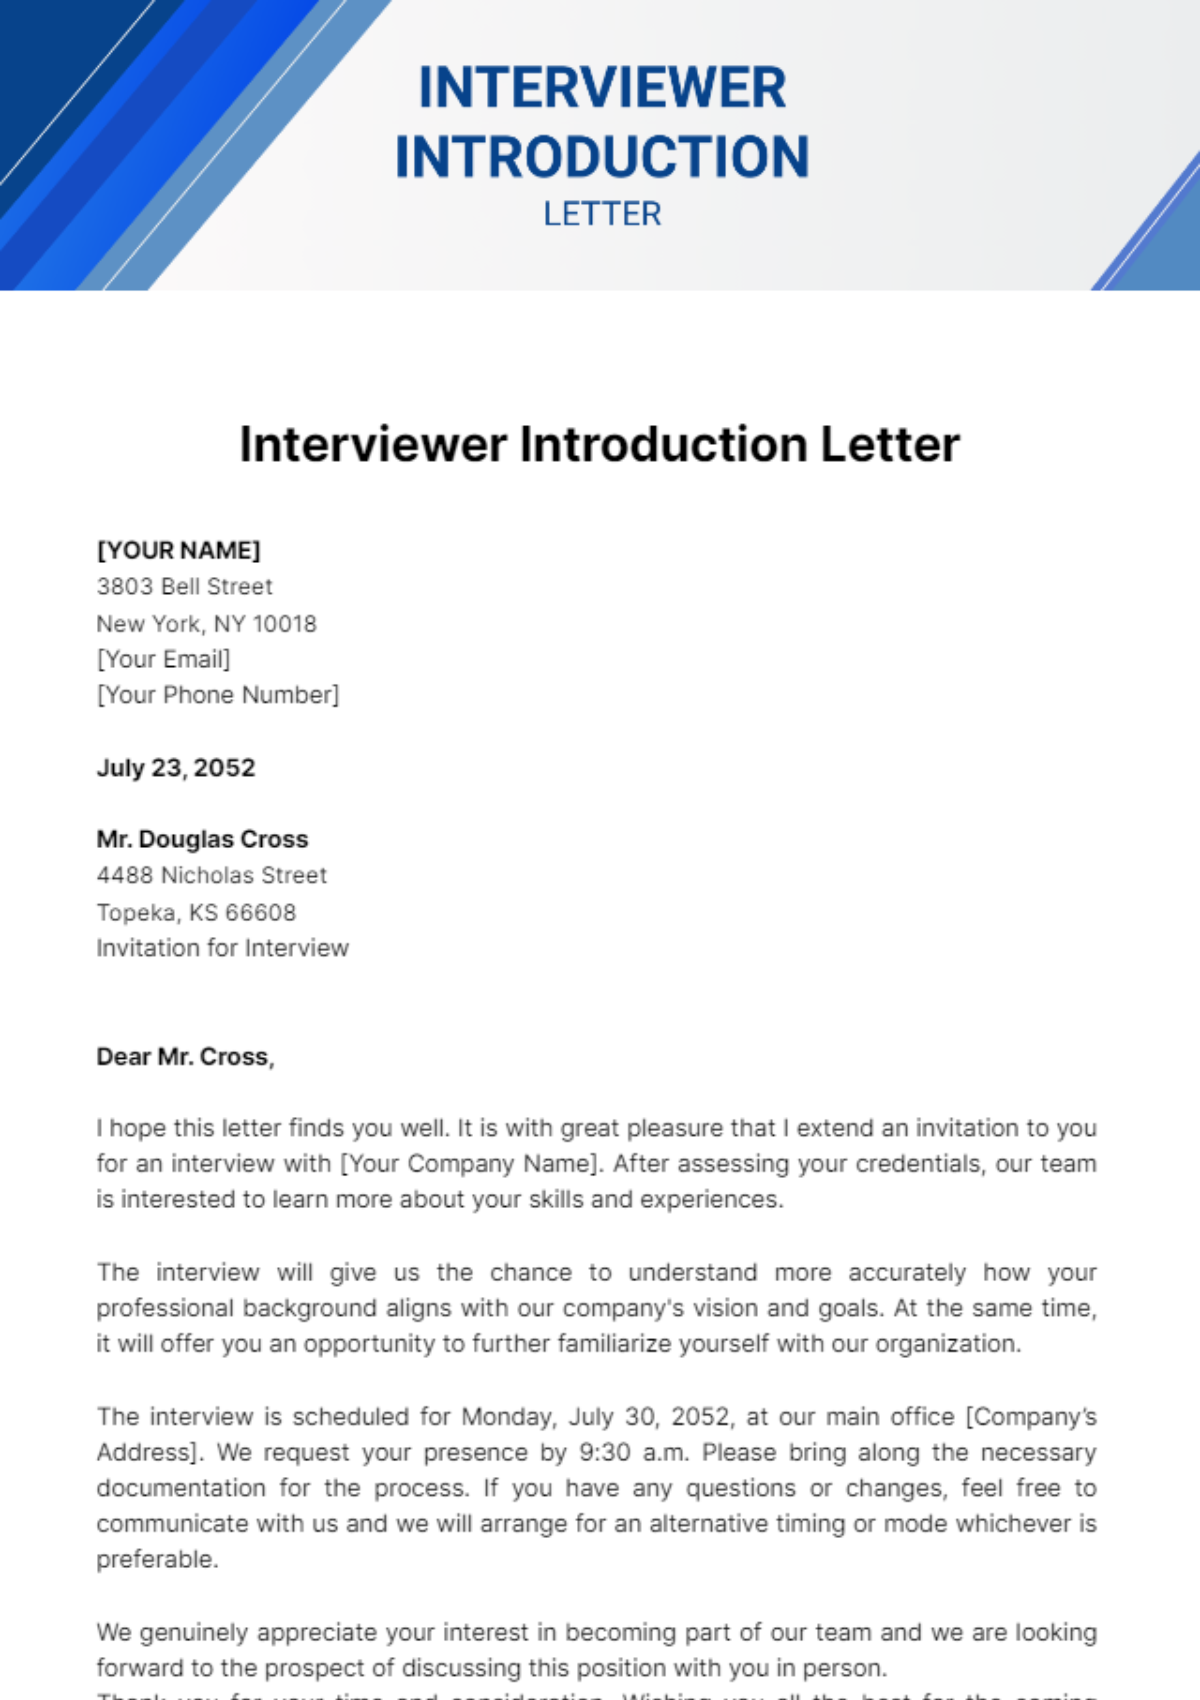 Free Interviewer Introduction Letter Template